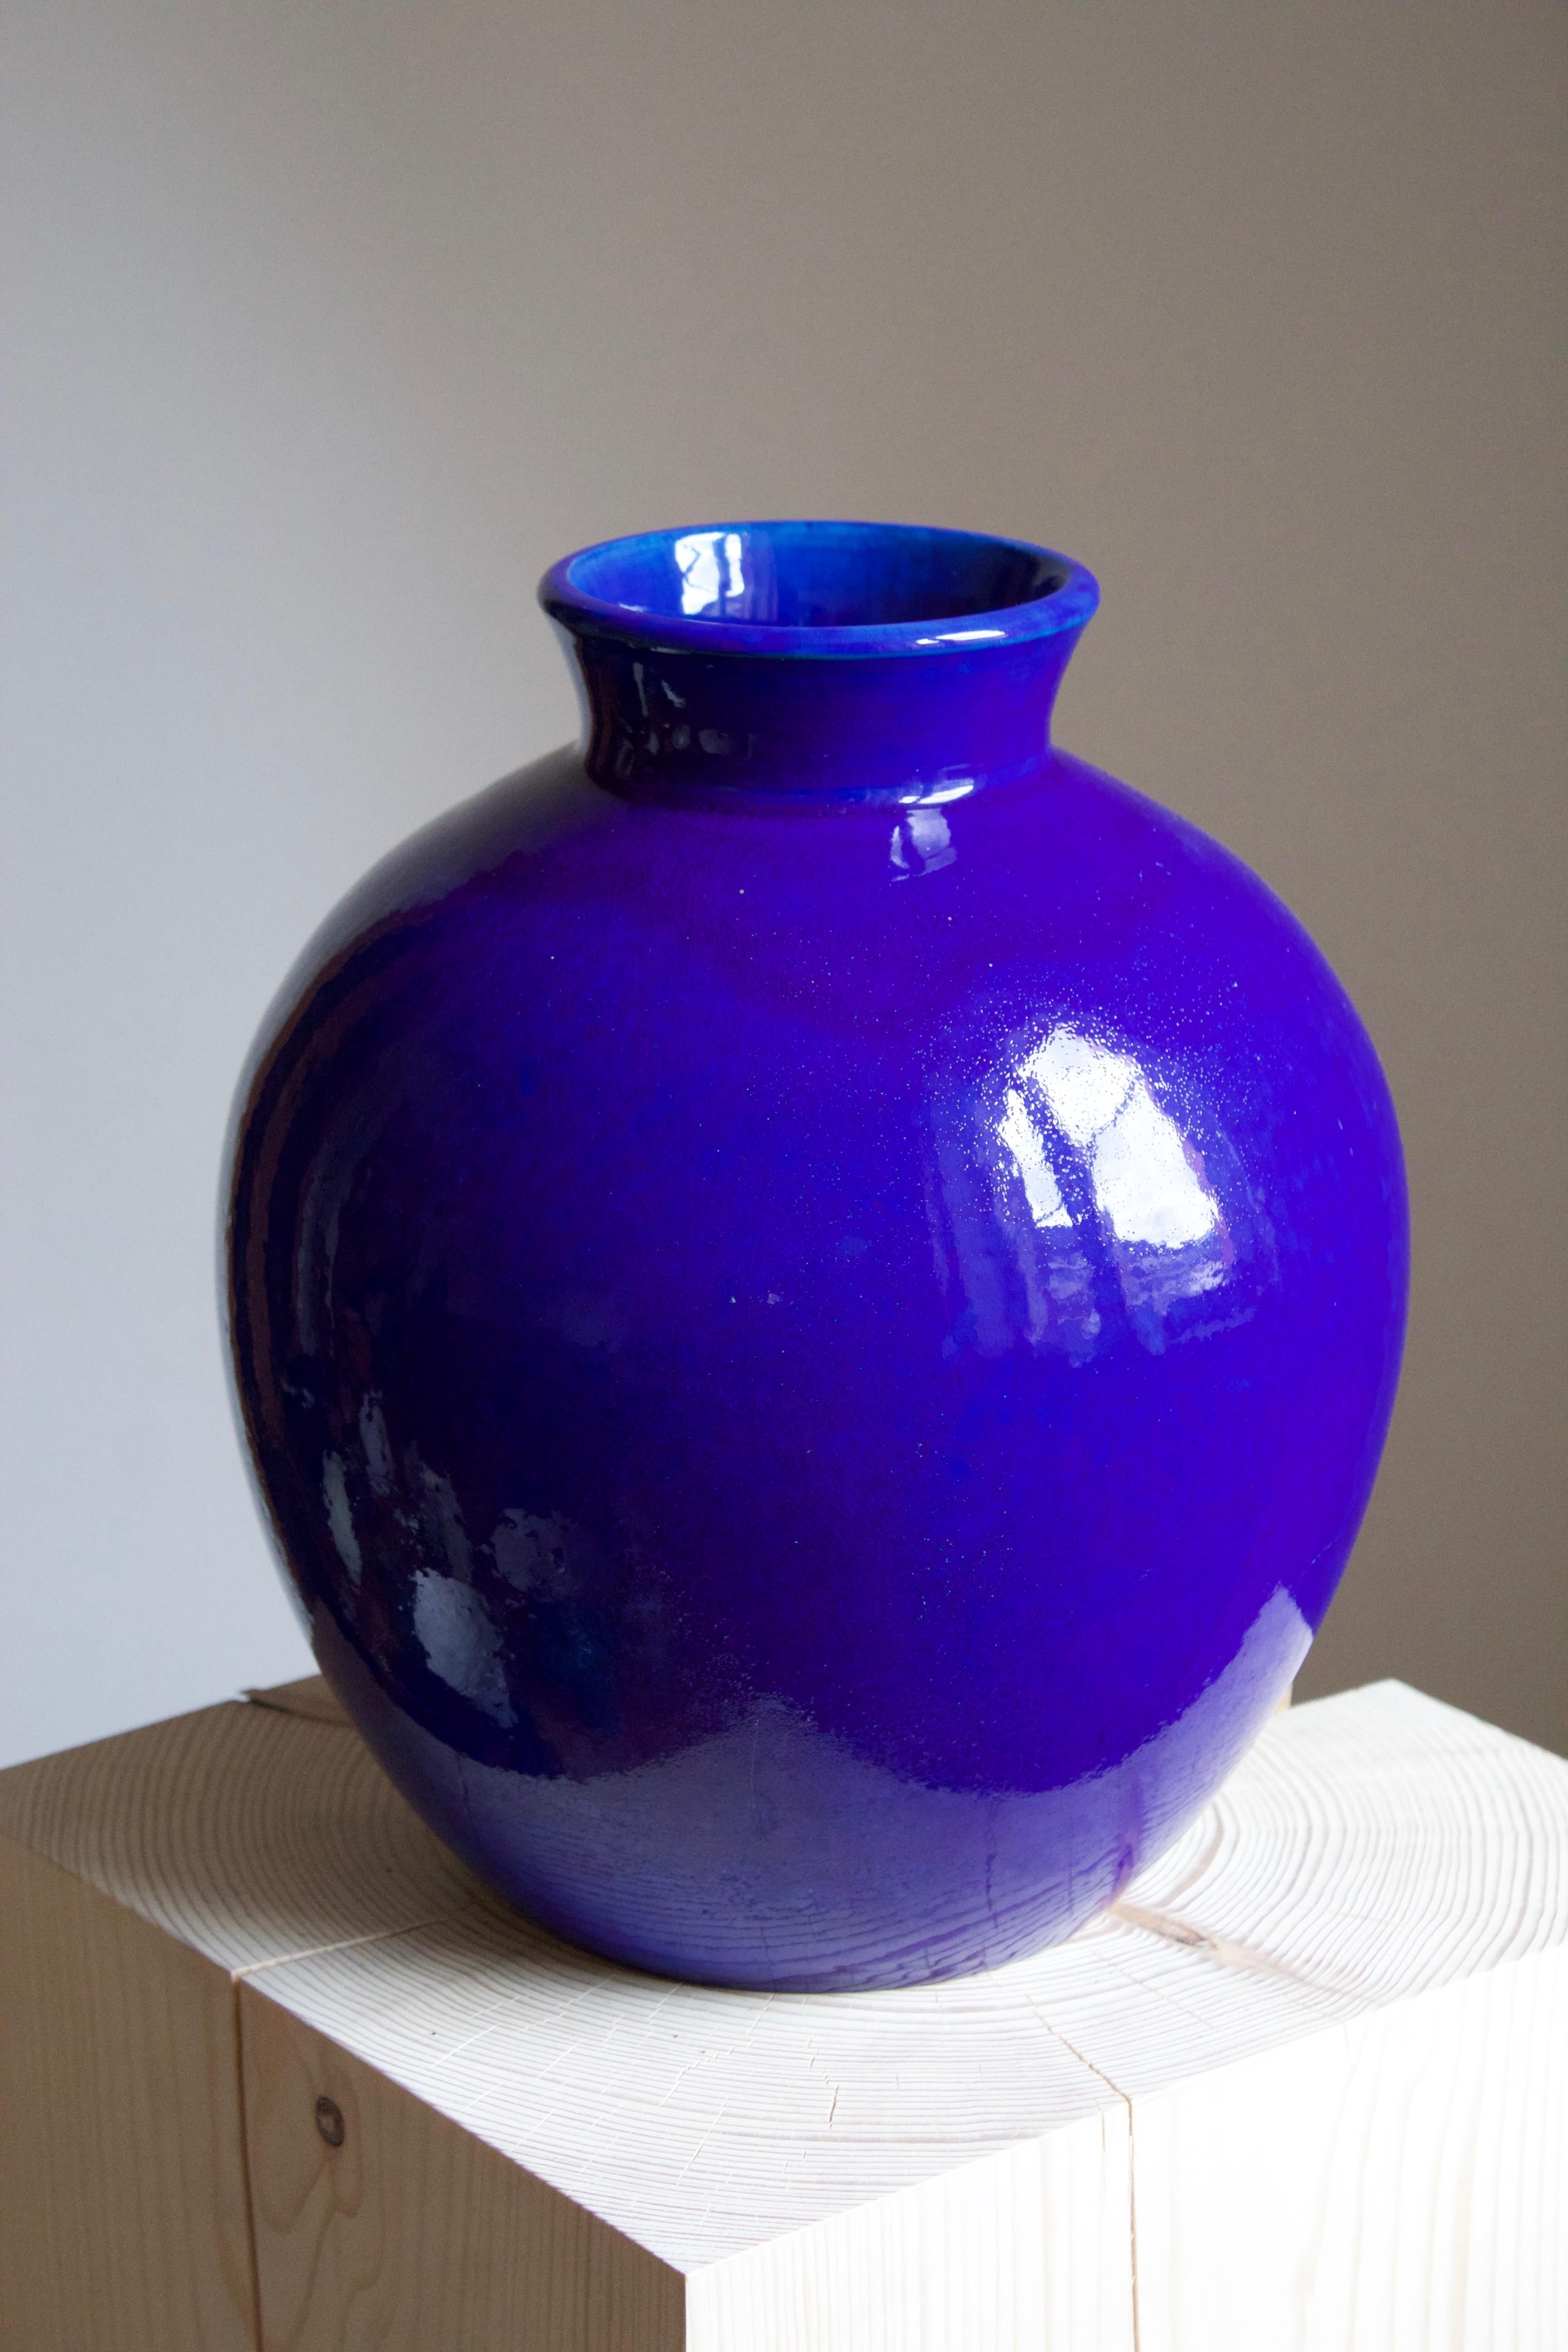 A very large vase. Designed and produced by Herman Kähler. Signed HAK. 

As is Kählers signature, the clay was sourced on the island of Bornholm. On this vase, an intense blue glaze has been applied.

Kähler is an important ceramicist known for